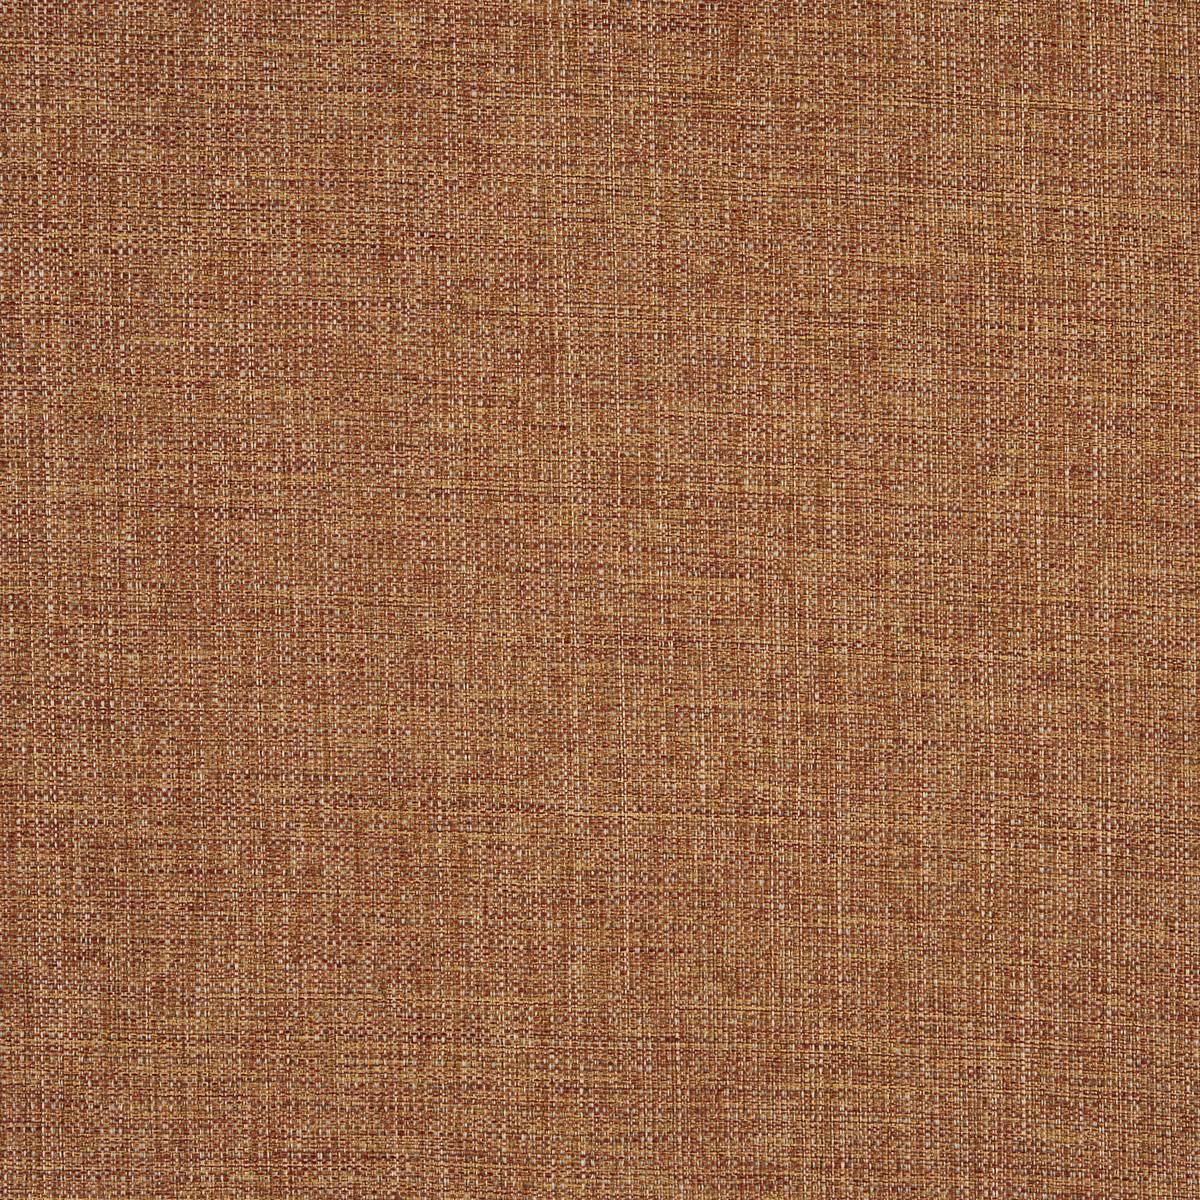 Tweed Ginger Fabric by Prestigious Textiles